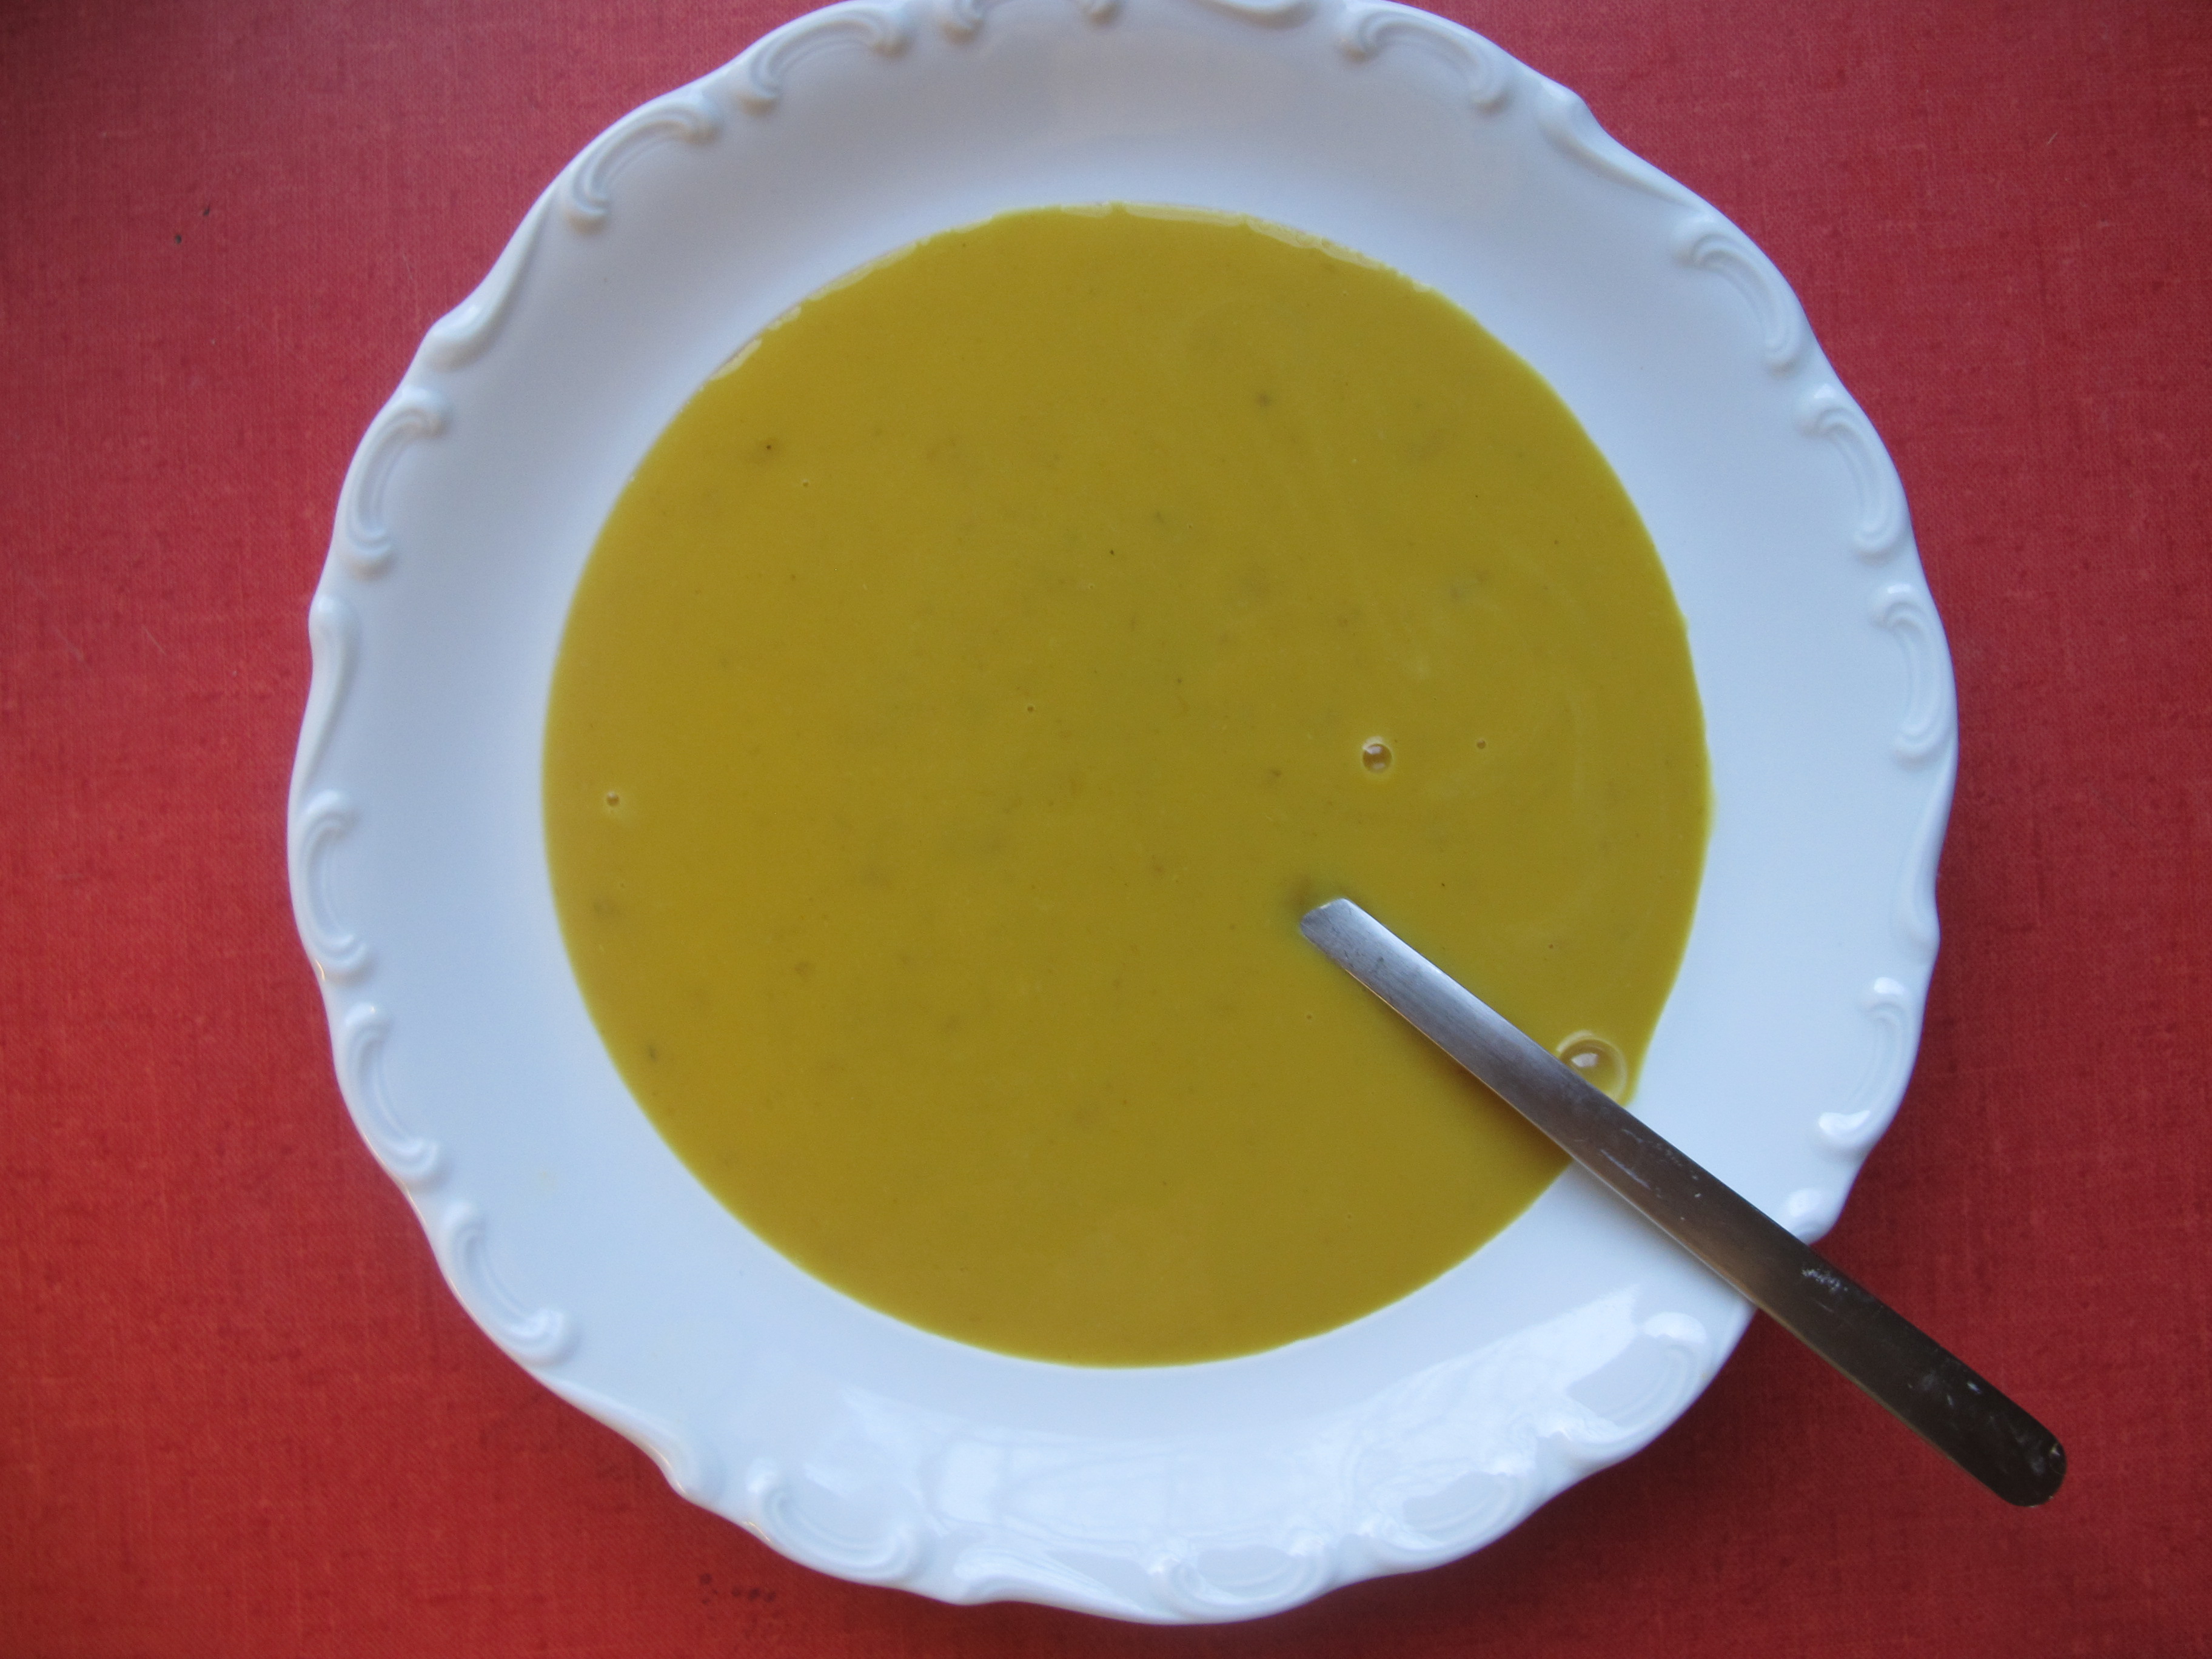 Curried Coconut Butternut Squash Soup